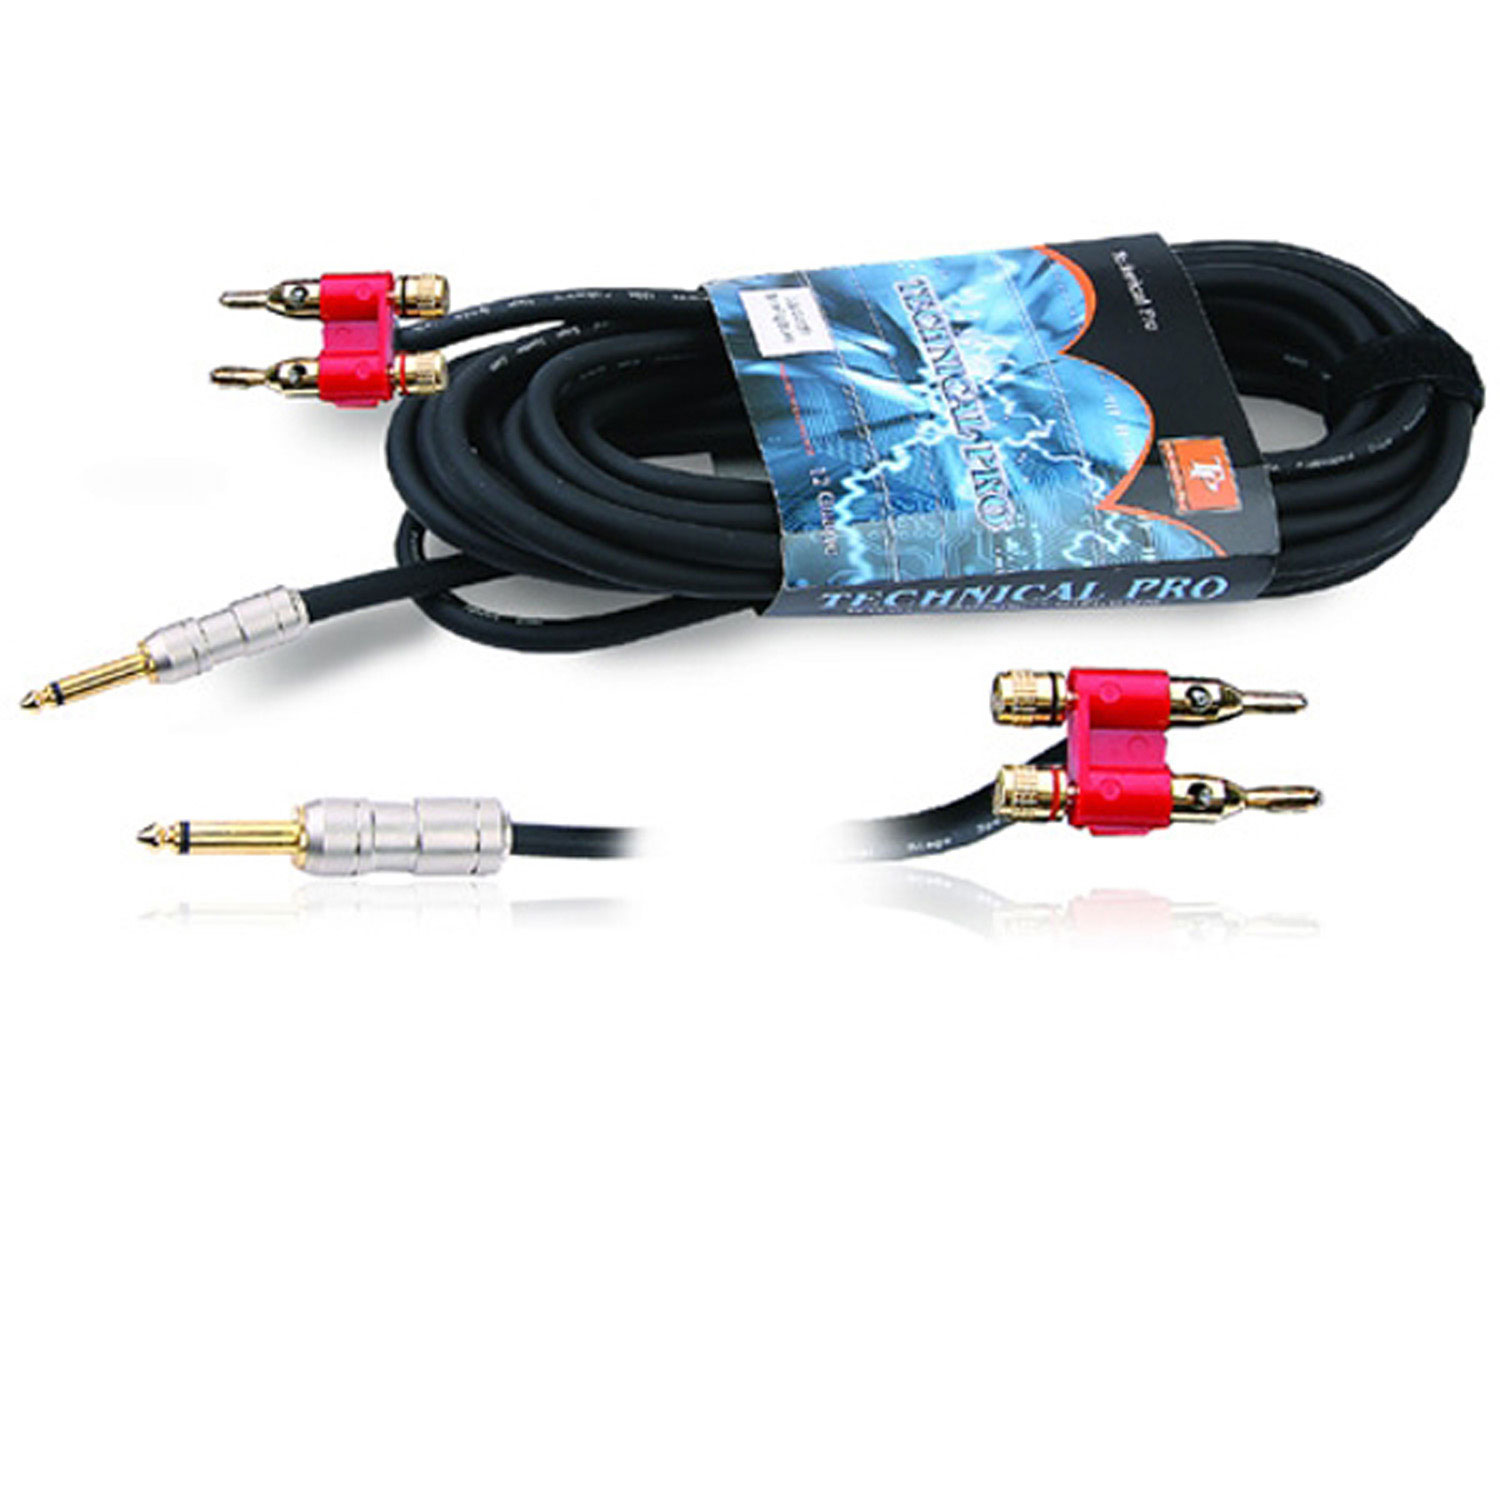 Technical Pro 25 in. to Banana Speaker Cables 50 ft. Feet 16 Gauge